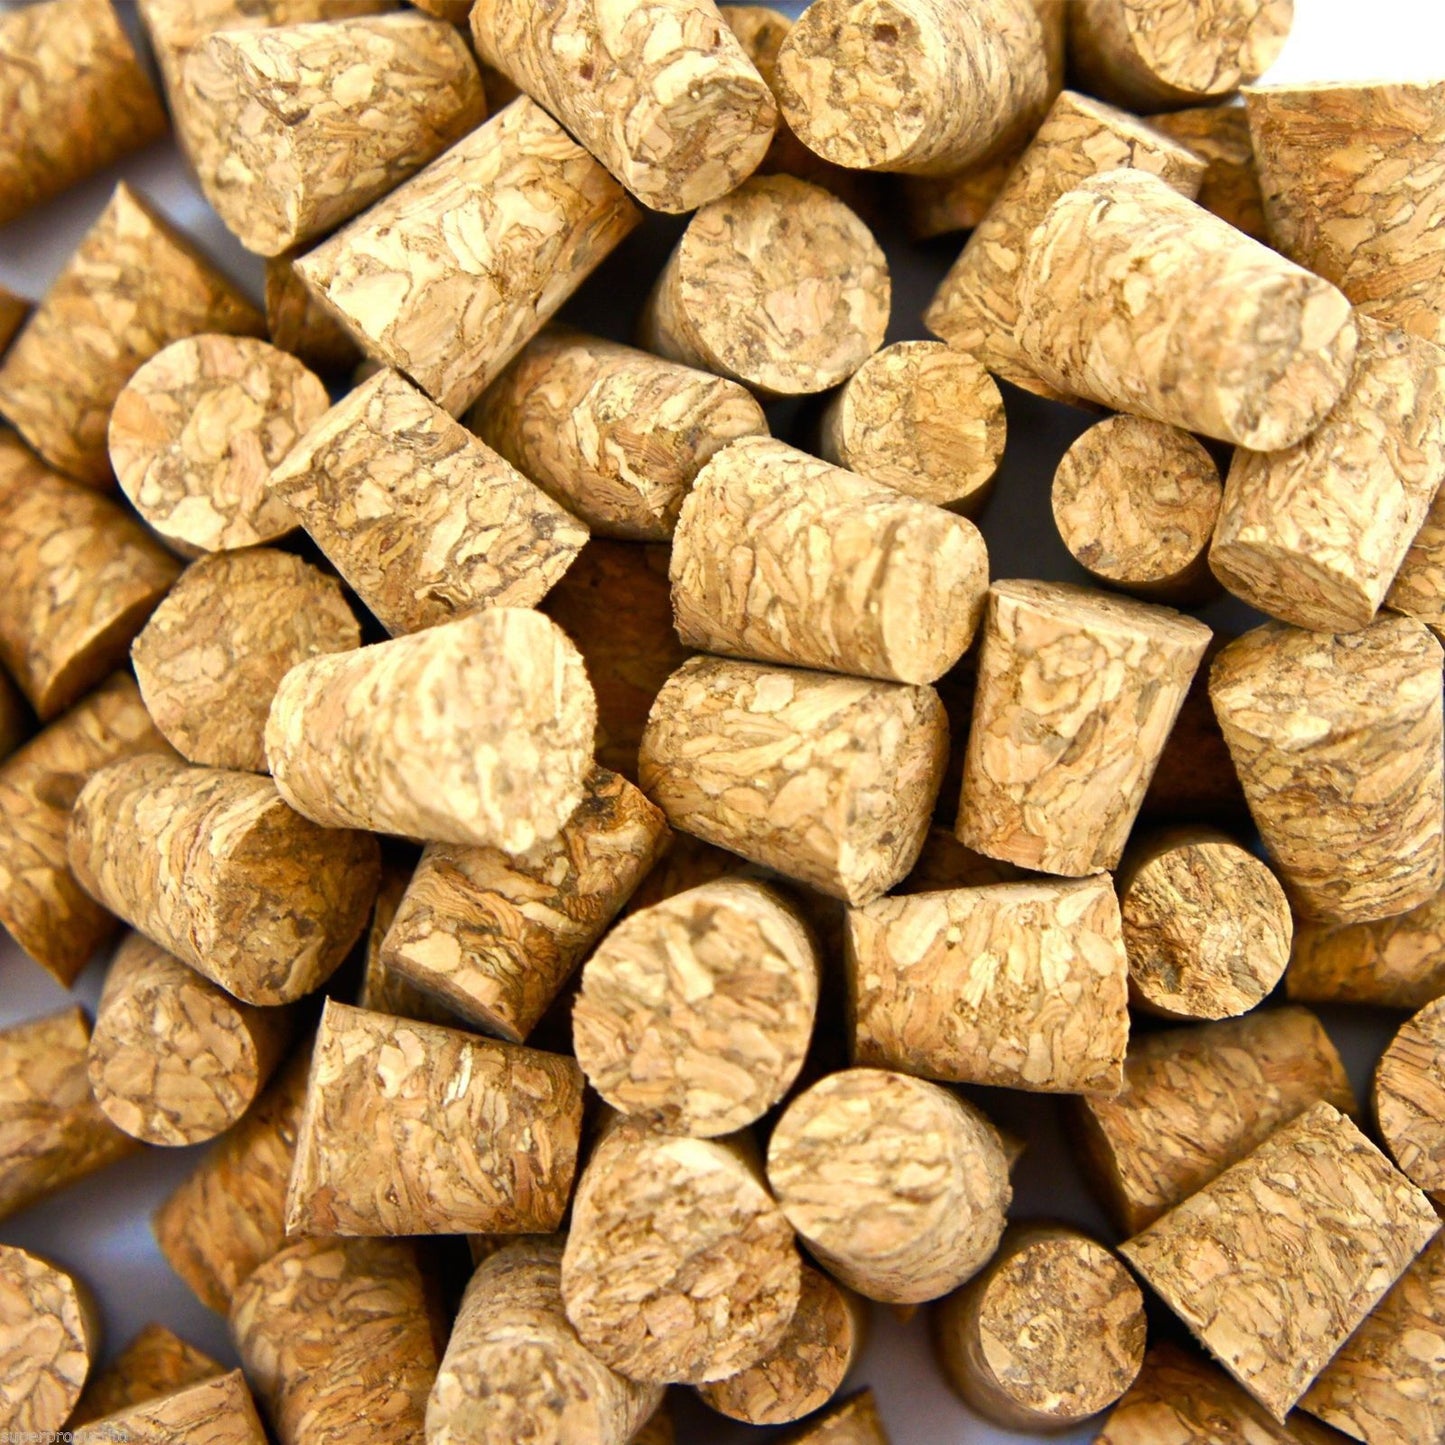 100 pcs Small Body Piercing Corks for Needles Natural Tool Stopper Jewelry Stud